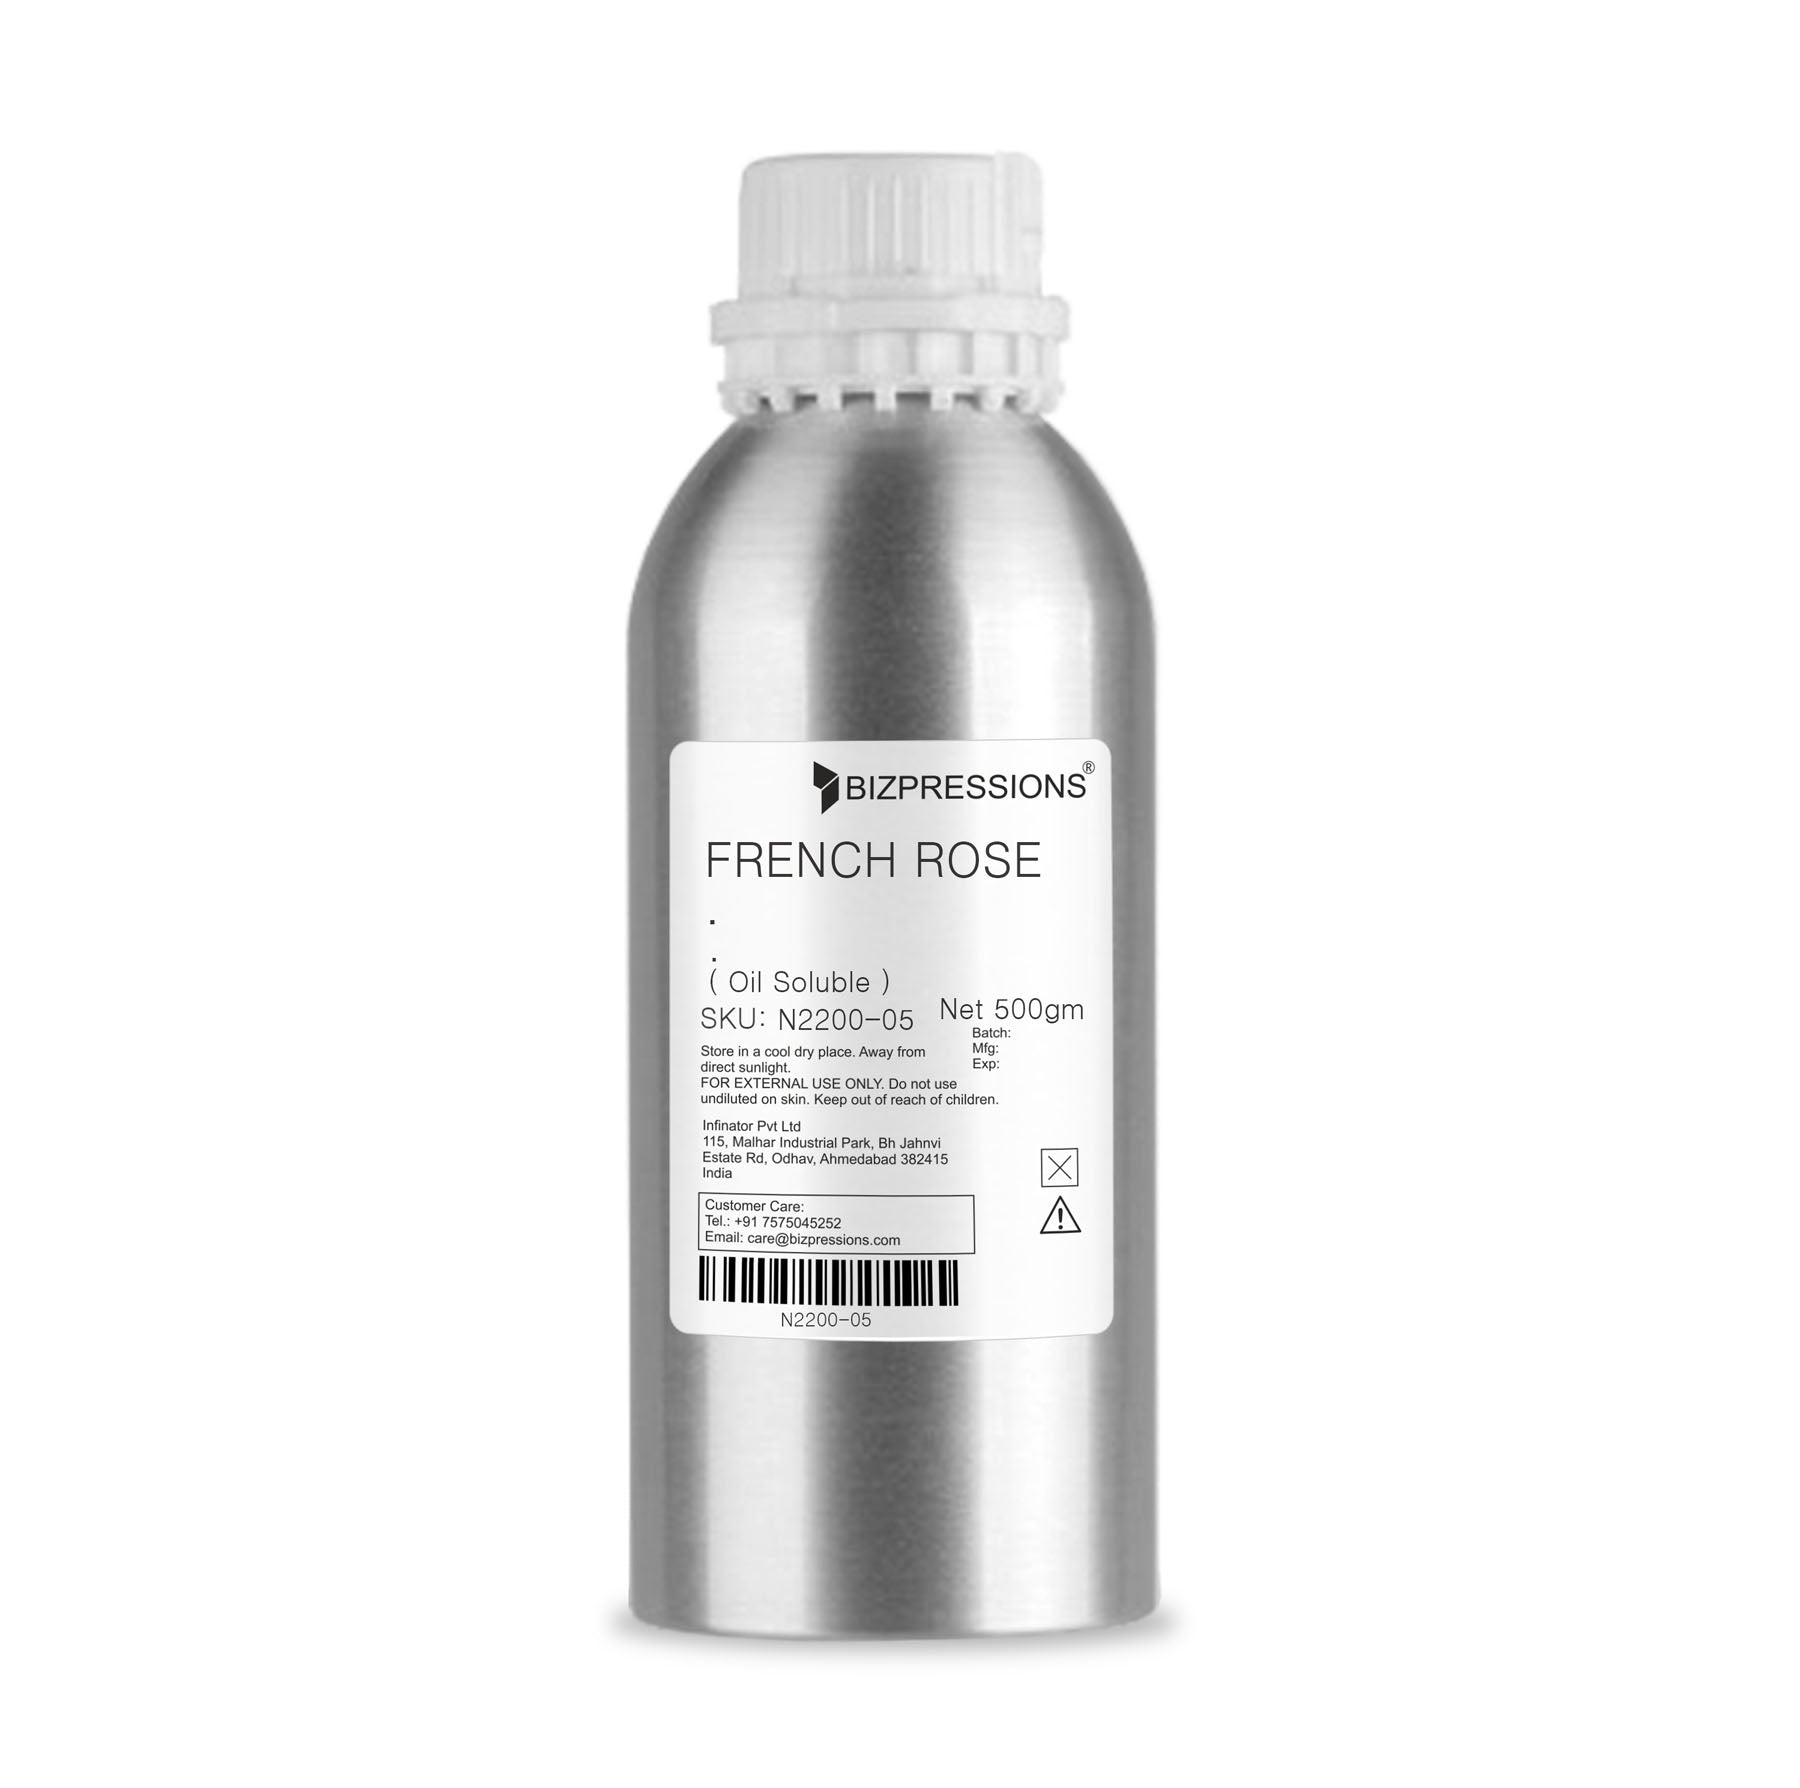 FRENCH ROSE - Fragrance ( Oil Soluble ) - 500 gm